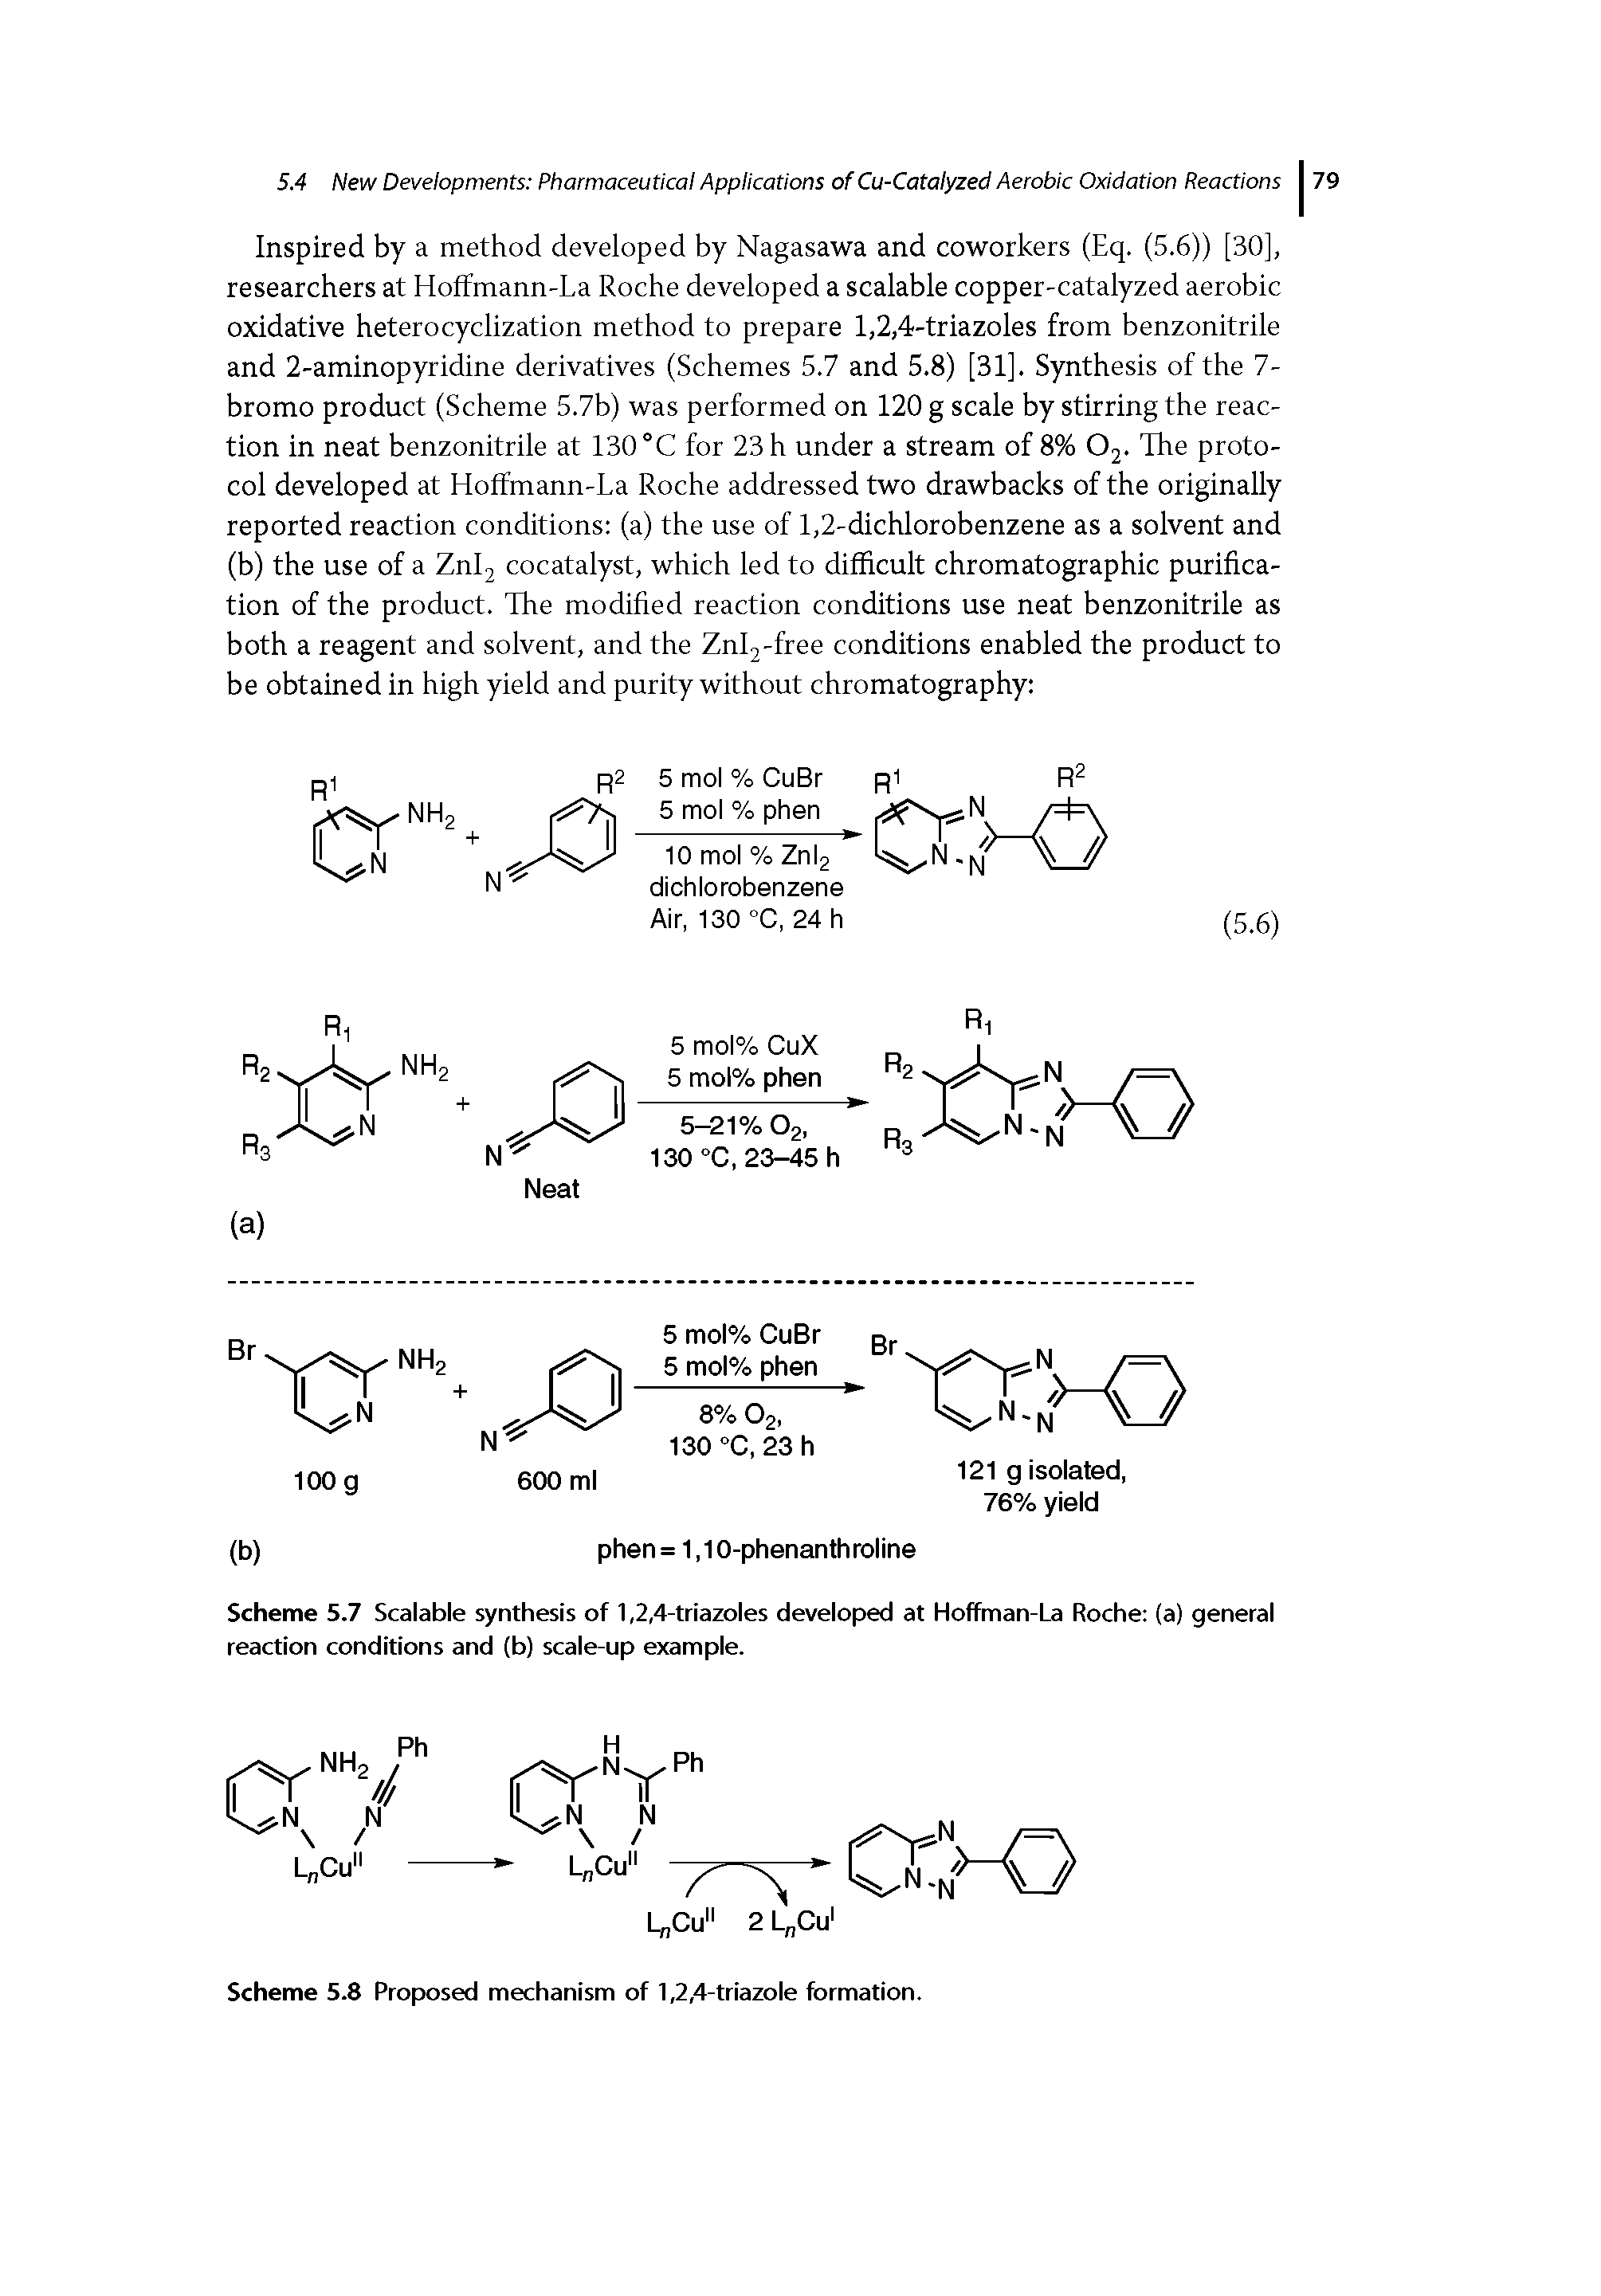 Scheme 5.7 Scalable synthesis of 1,2,4-triazoles developed at Hoffman-La Roche (a) general reaction conditions and (b) scale-up example.